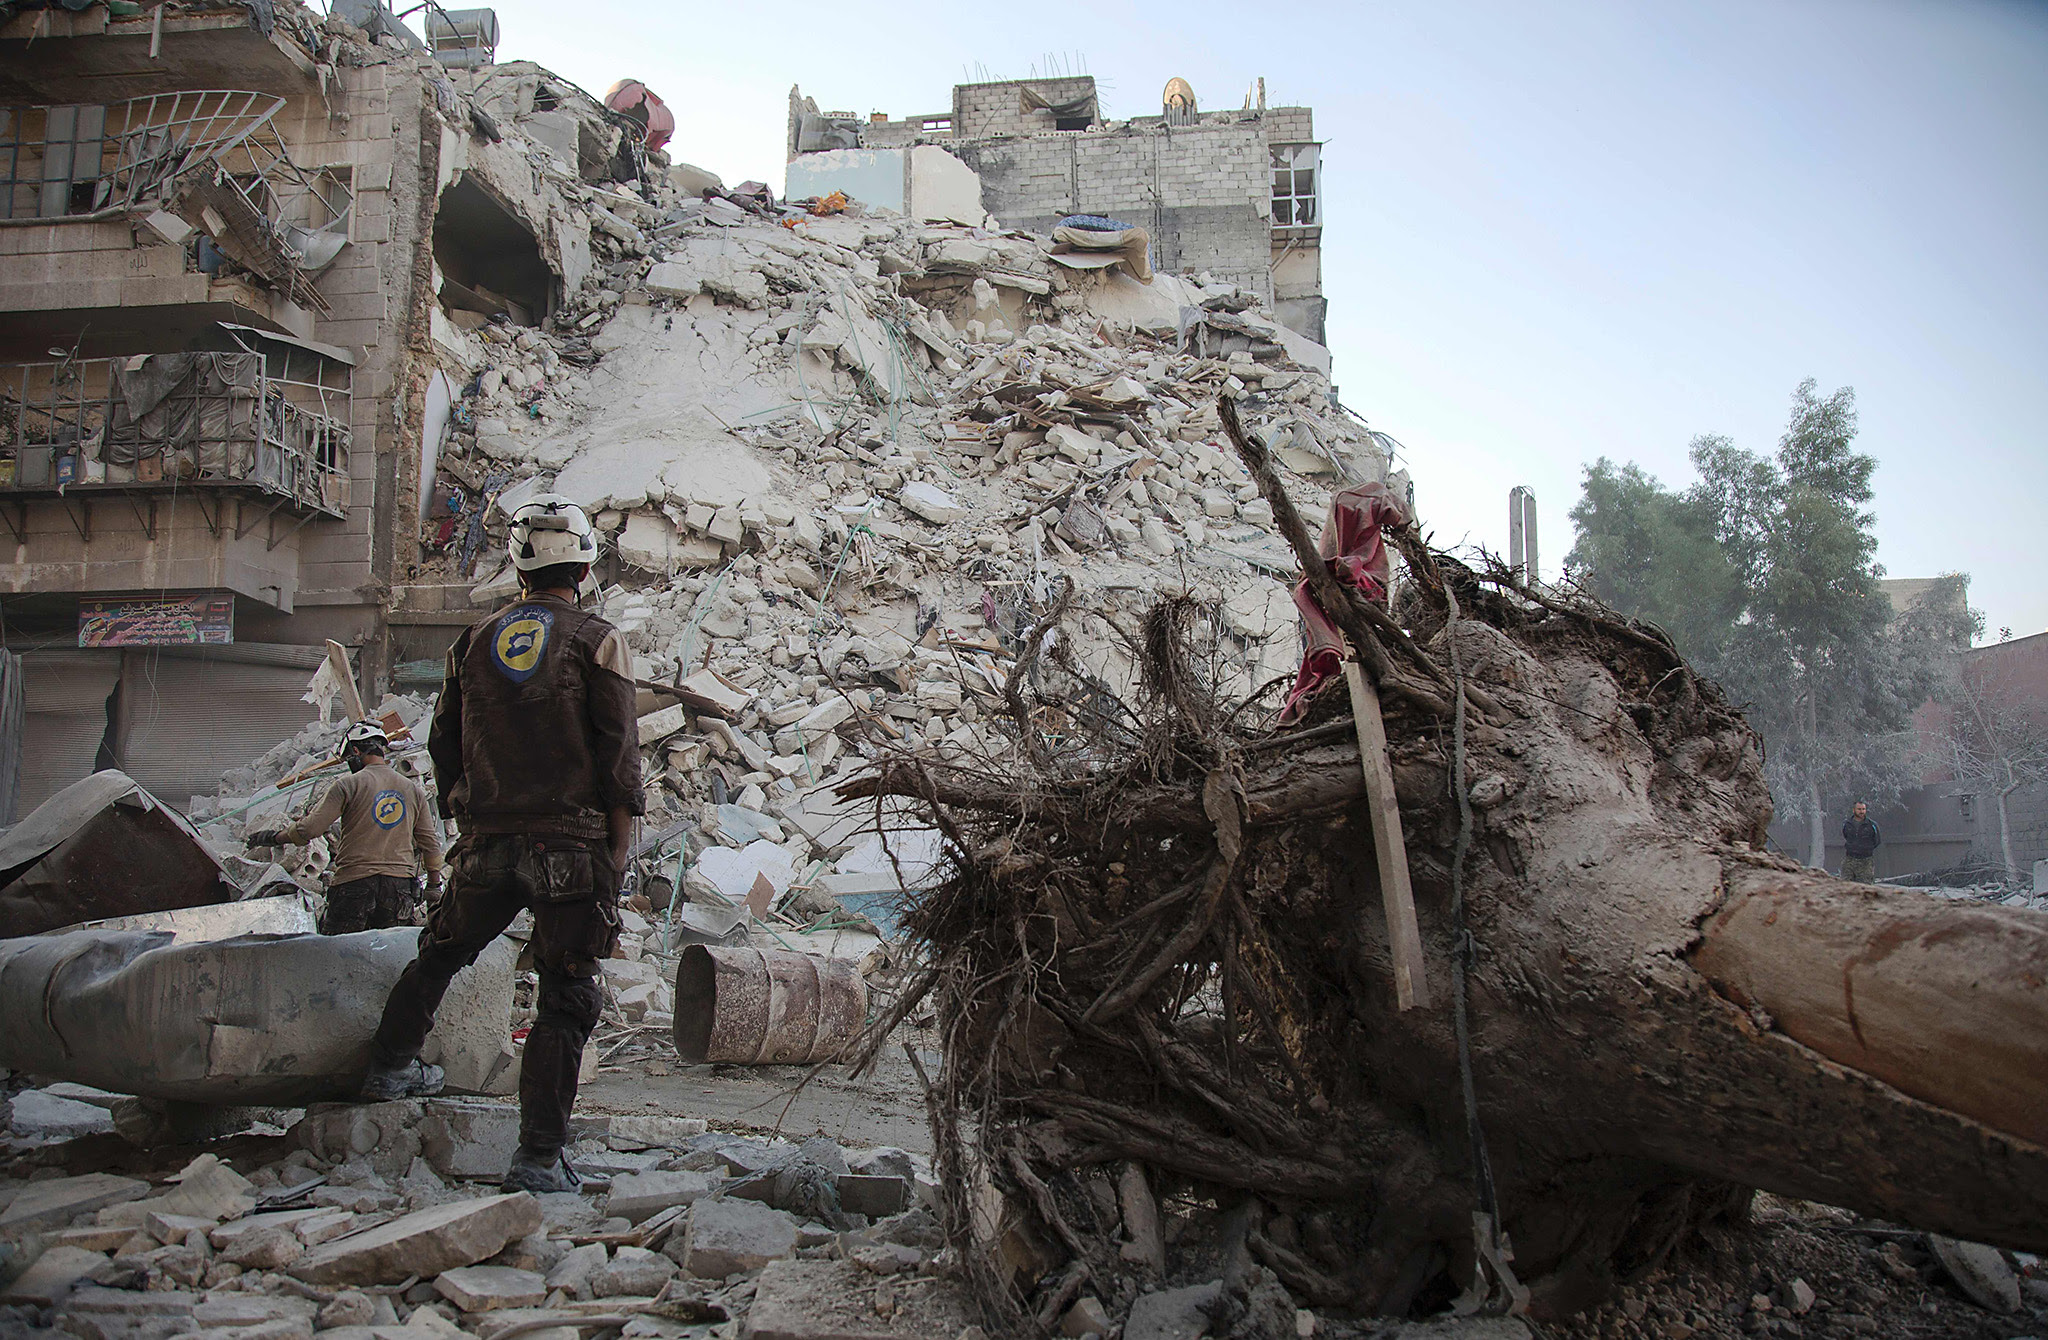 A member of the Syrian Civil Defence, known as the White Helmets, stands amid the rubble of a destroyed building during a rescue operation following reported air strikes in the rebel-held Qatarji neighbourhood of the northern city of Aleppo, on October 17, 2016.  Dozens of civilians were killed as air strikes hammered rebel-held parts of Aleppo early morning, despite Western warnings of potential sanctions against Syria and Russia over attacks on the city. Both Russian and Syrian warplanes are carrying out air strikes over Aleppo in support of a major offensive by regime forces to capture rebel-held parts of the northern city.  / AFP PHOTO / KARAM AL-MASRIKARAM AL-MASRI/AFP/Getty Images